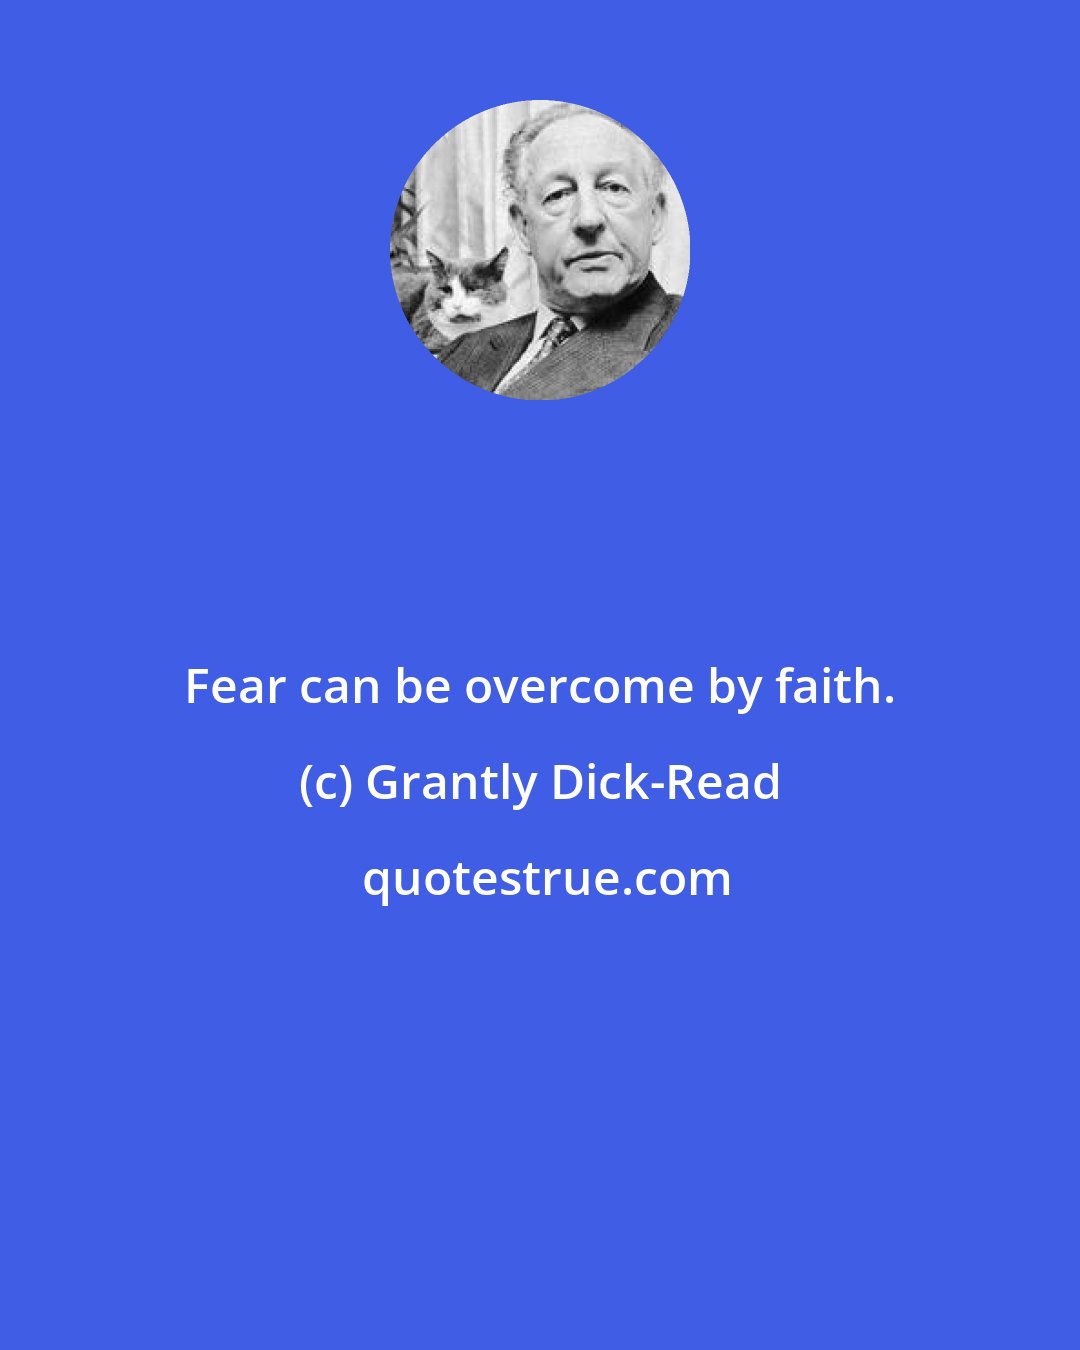 Grantly Dick-Read: Fear can be overcome by faith.